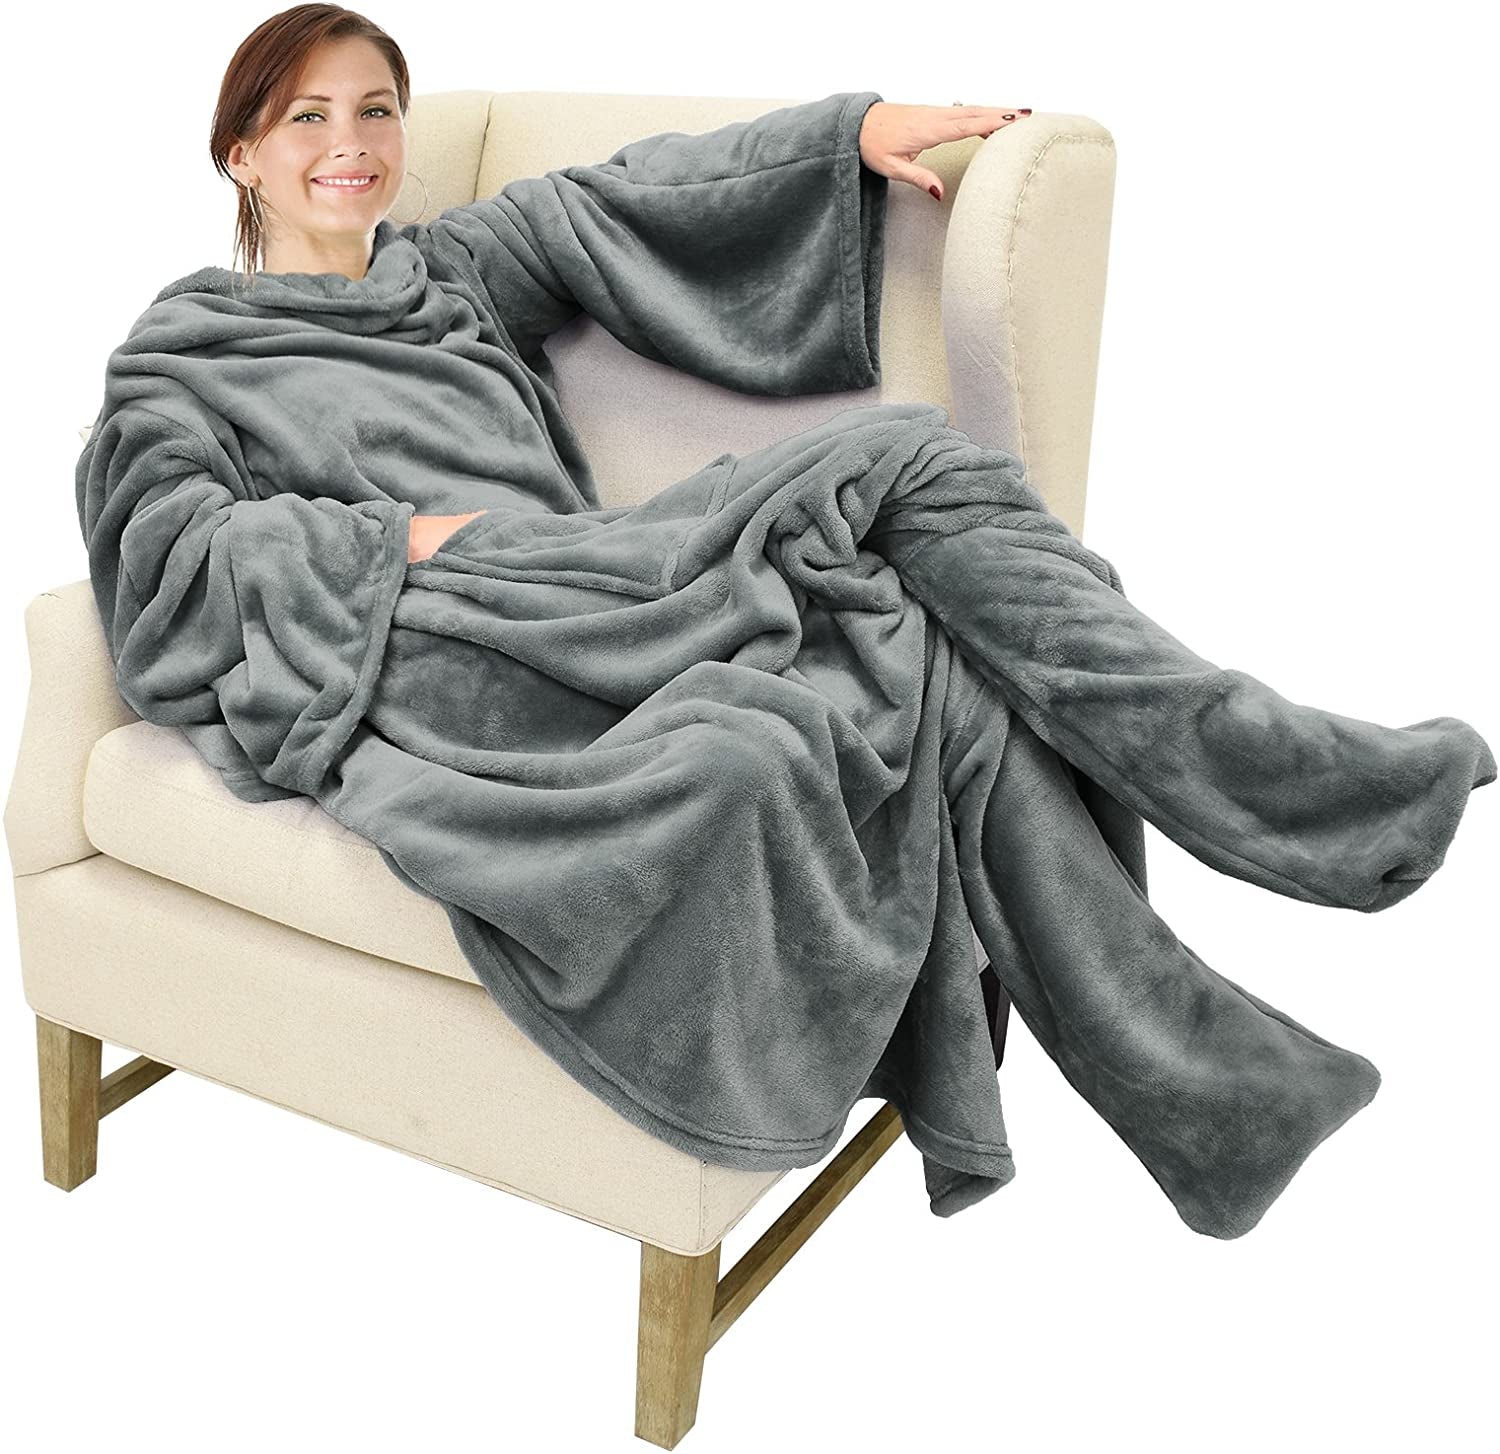 Wearable Fleece/Sherpa Blanket with Sleeves and Foot Pockets for Adult Women Men, Micro Plush Comfy Wrap Sleeved Throw Blanket Robe Large